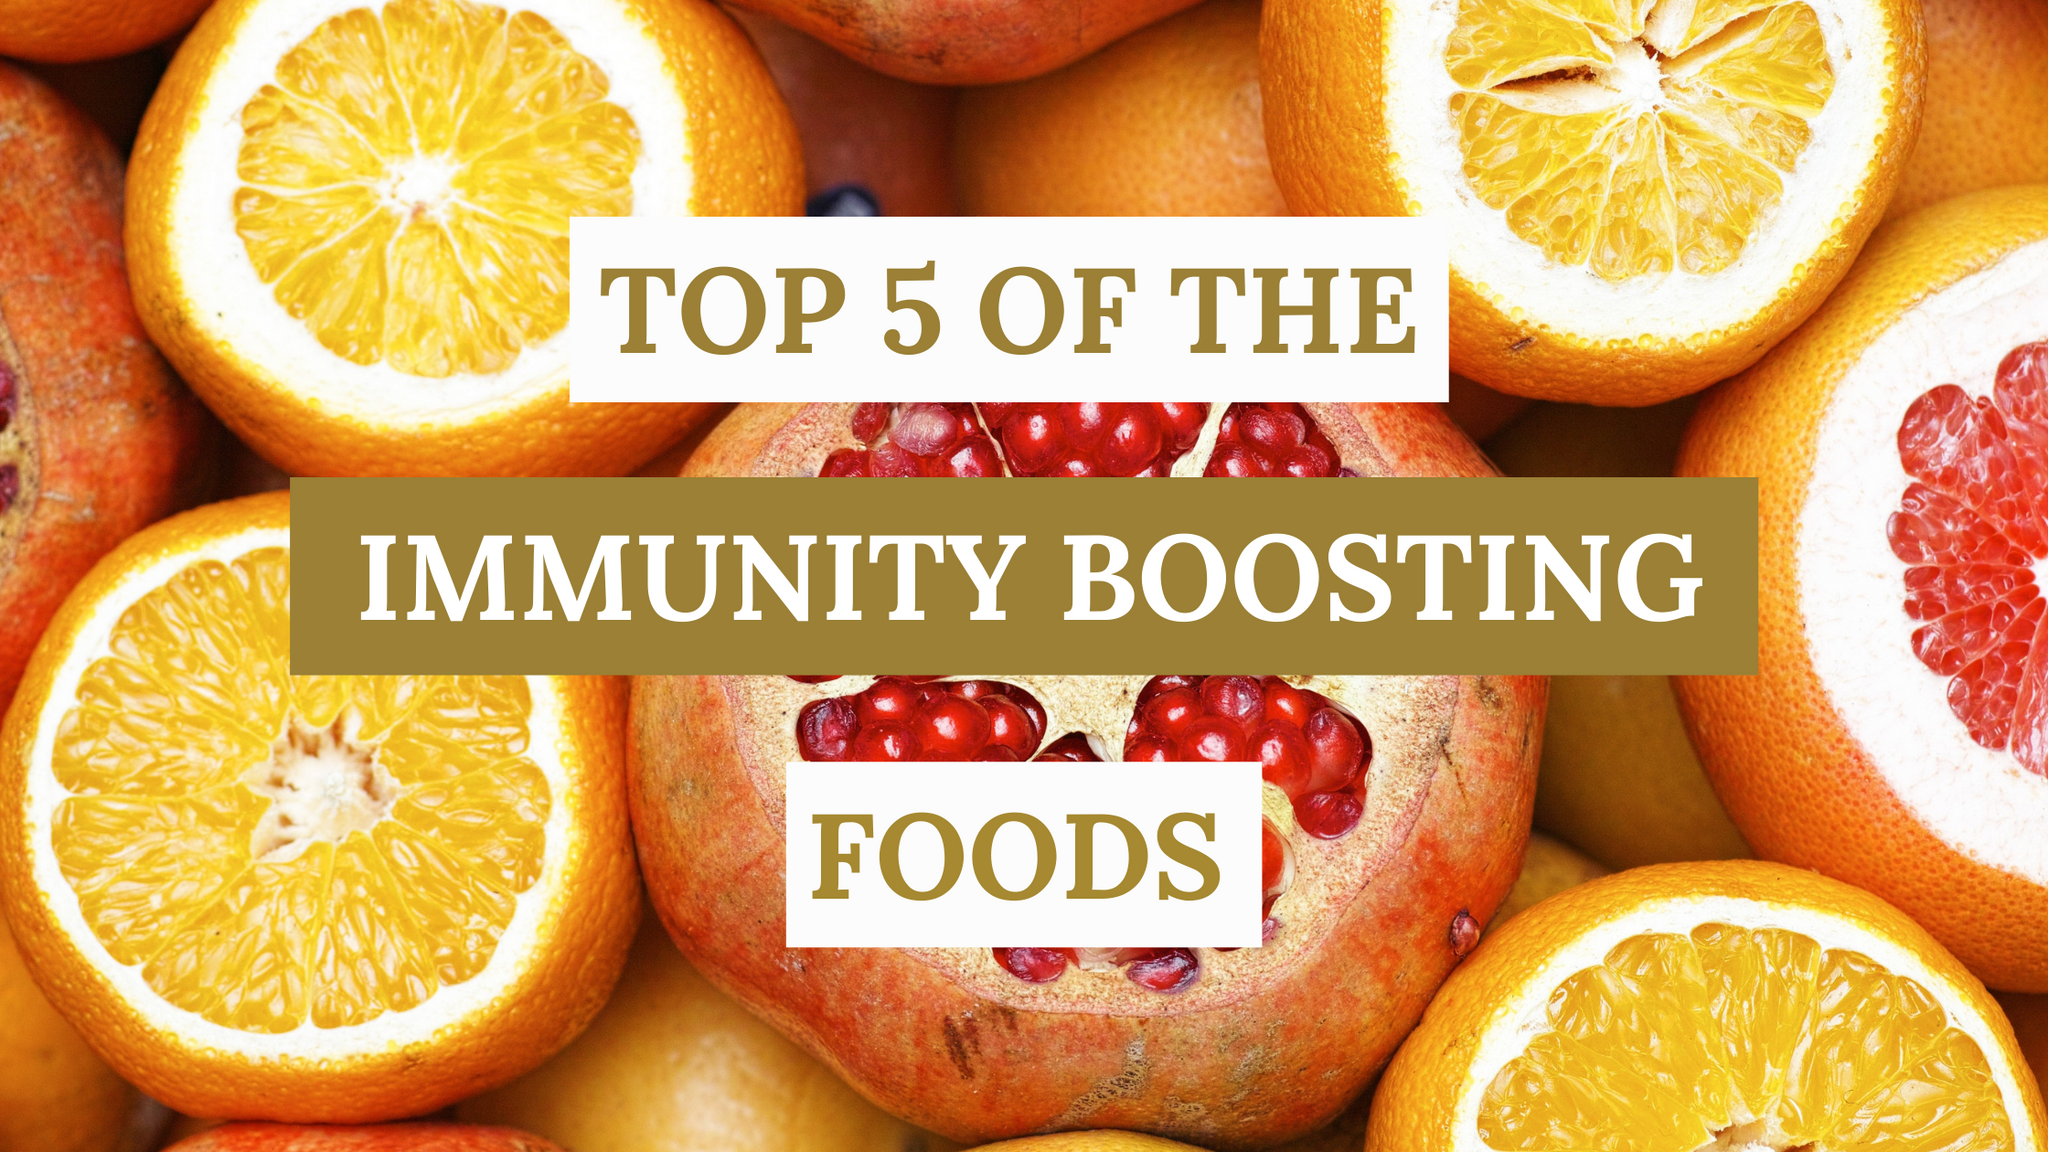 TOP 5 OF THE IMMUNITY BOOSTING FOODS